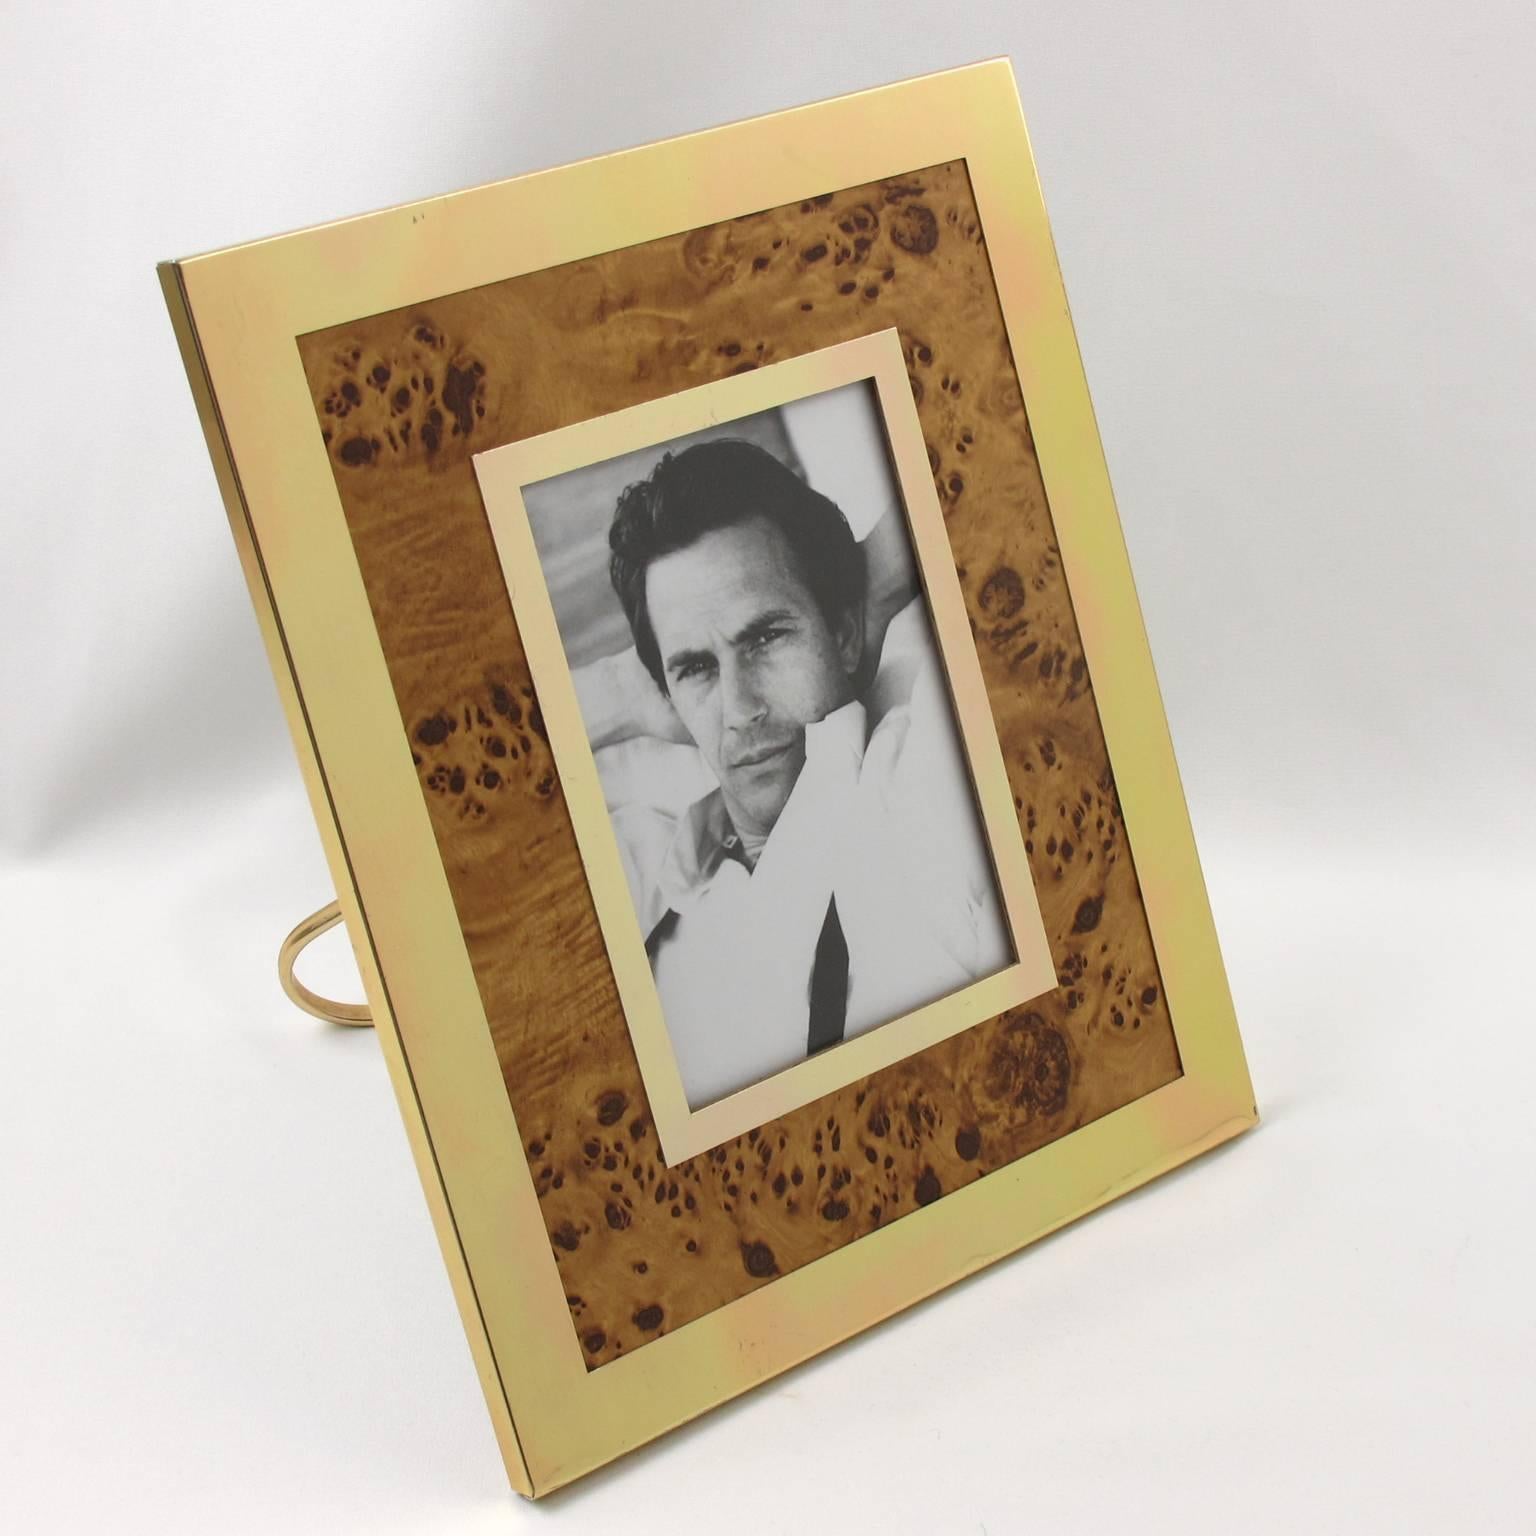 Lovely vintage Mid-Century Modern picture photo frame in the style of Willy Rizzo, circa 1970s. Gilded aluminum and formica imitating bird's eye maple wood. Metal easel at the back. Excellent vintage condition.

Measurements:
Overall 8.50 in. wide